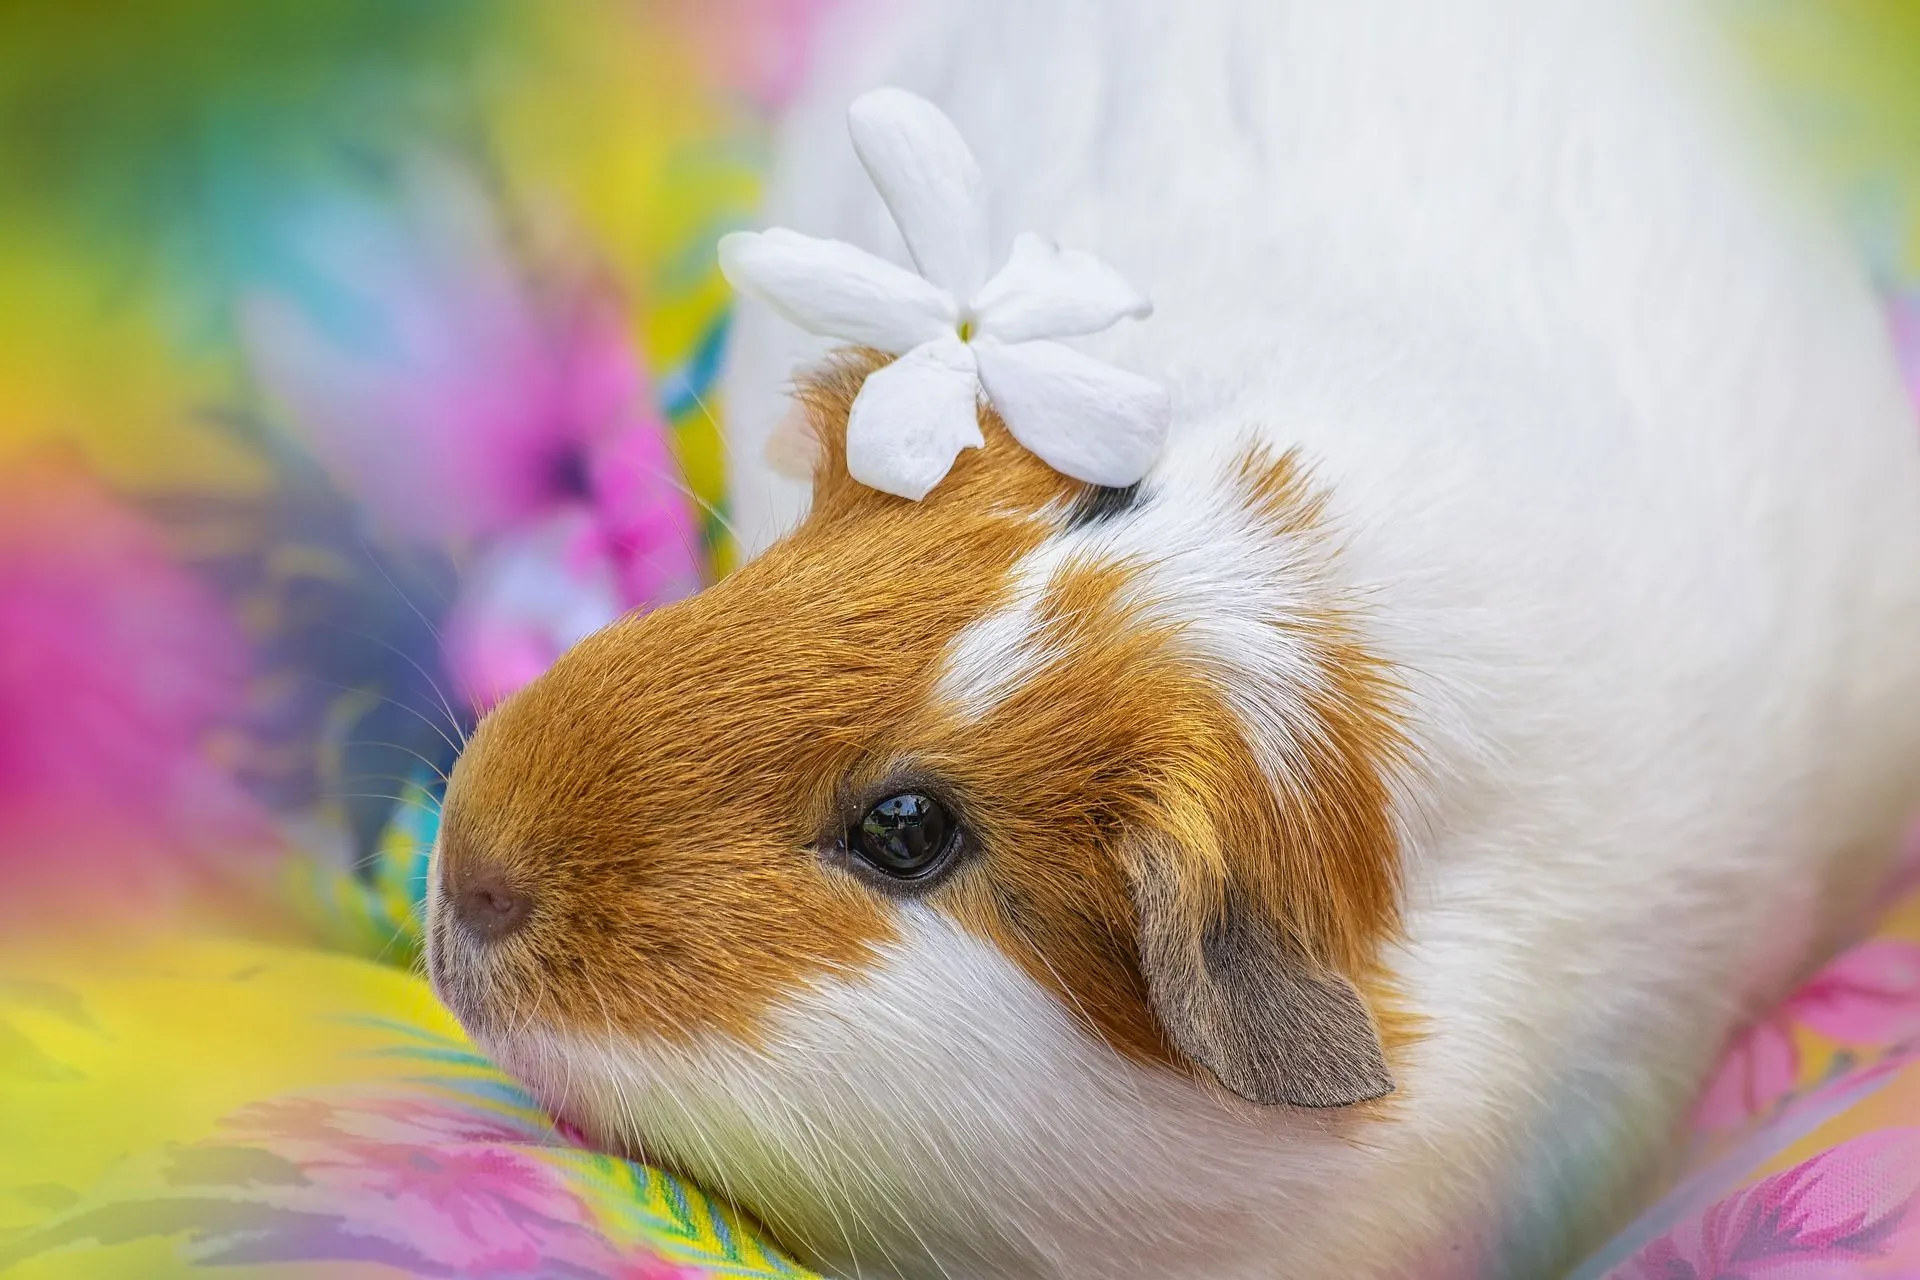 Texel guinea pigs look cute with their long curly coat.